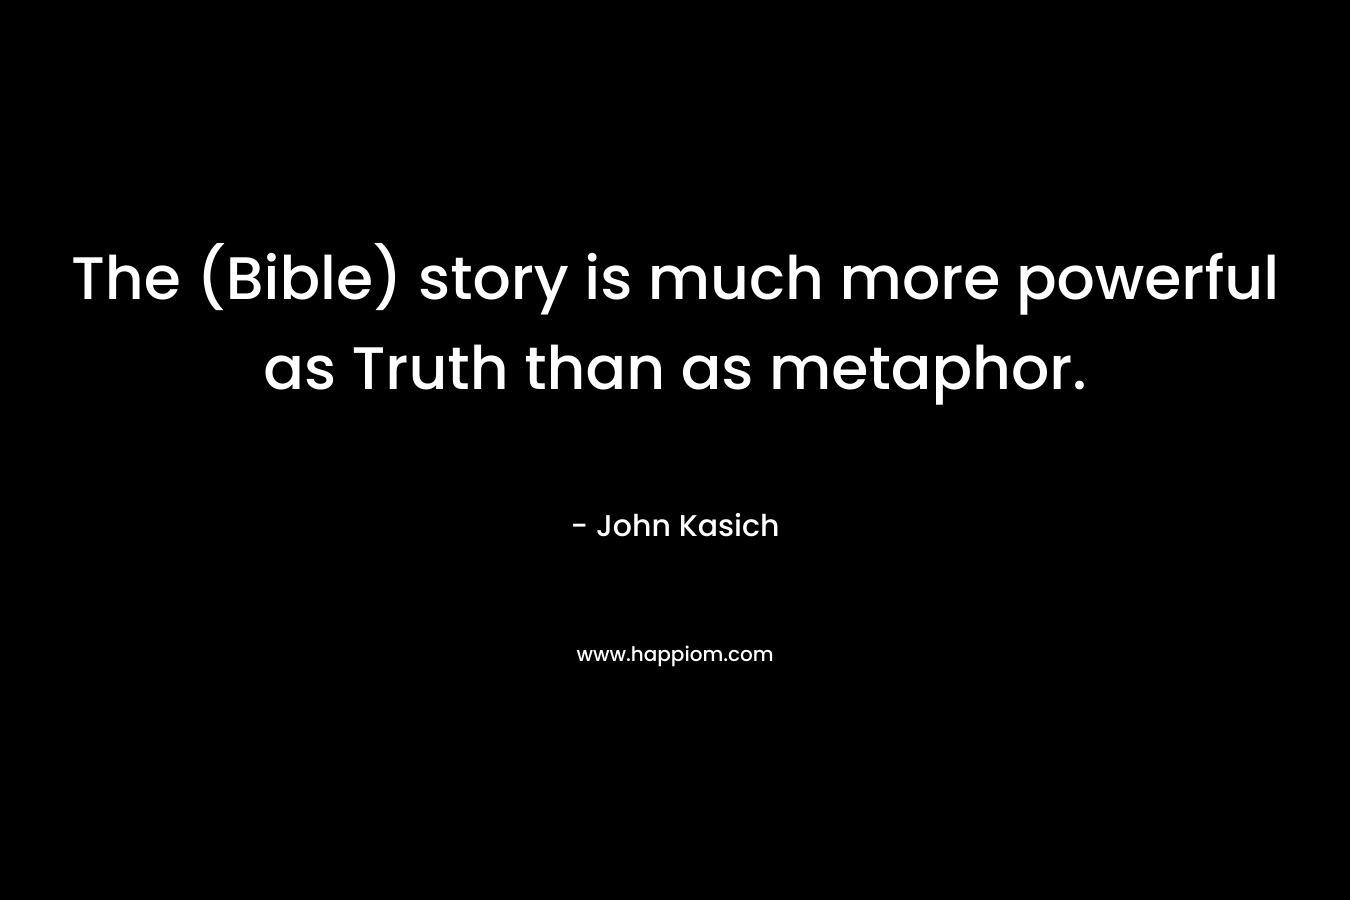 The (Bible) story is much more powerful as Truth than as metaphor.